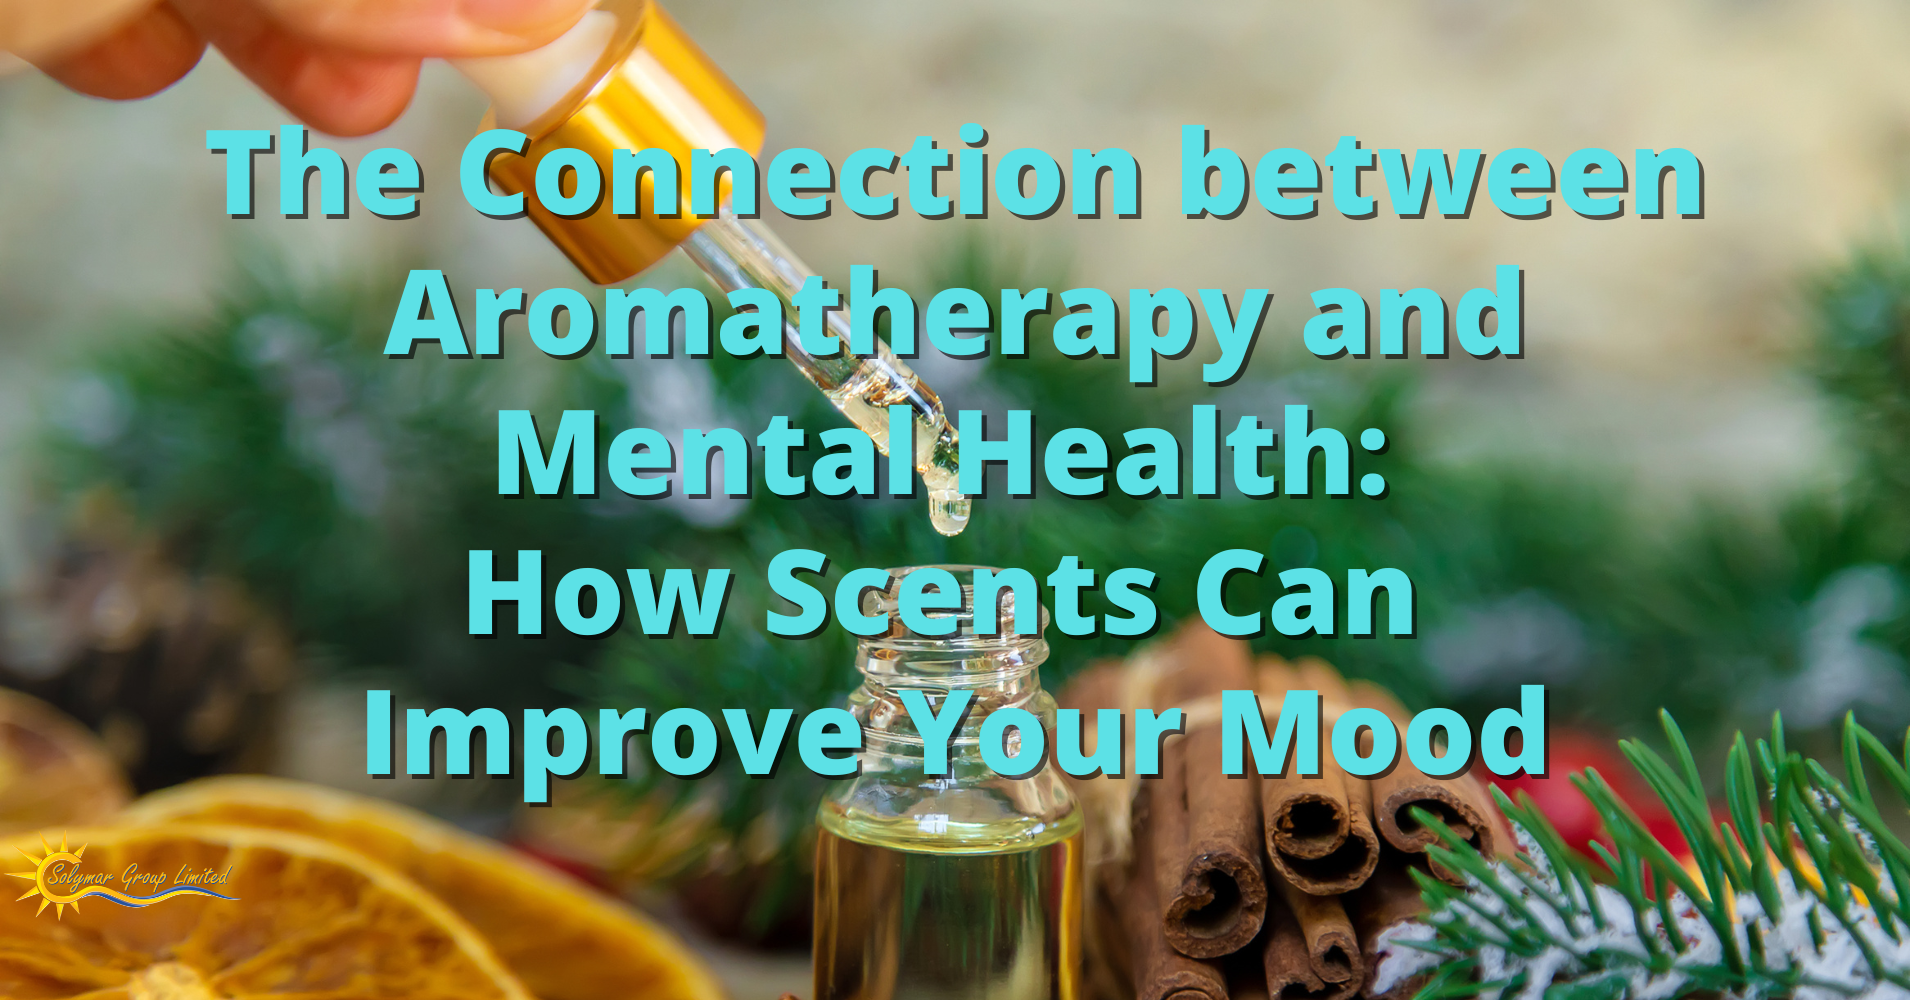 The Connection between Aromatherapy and Mental Health: How Scents Can Improve Your Mood